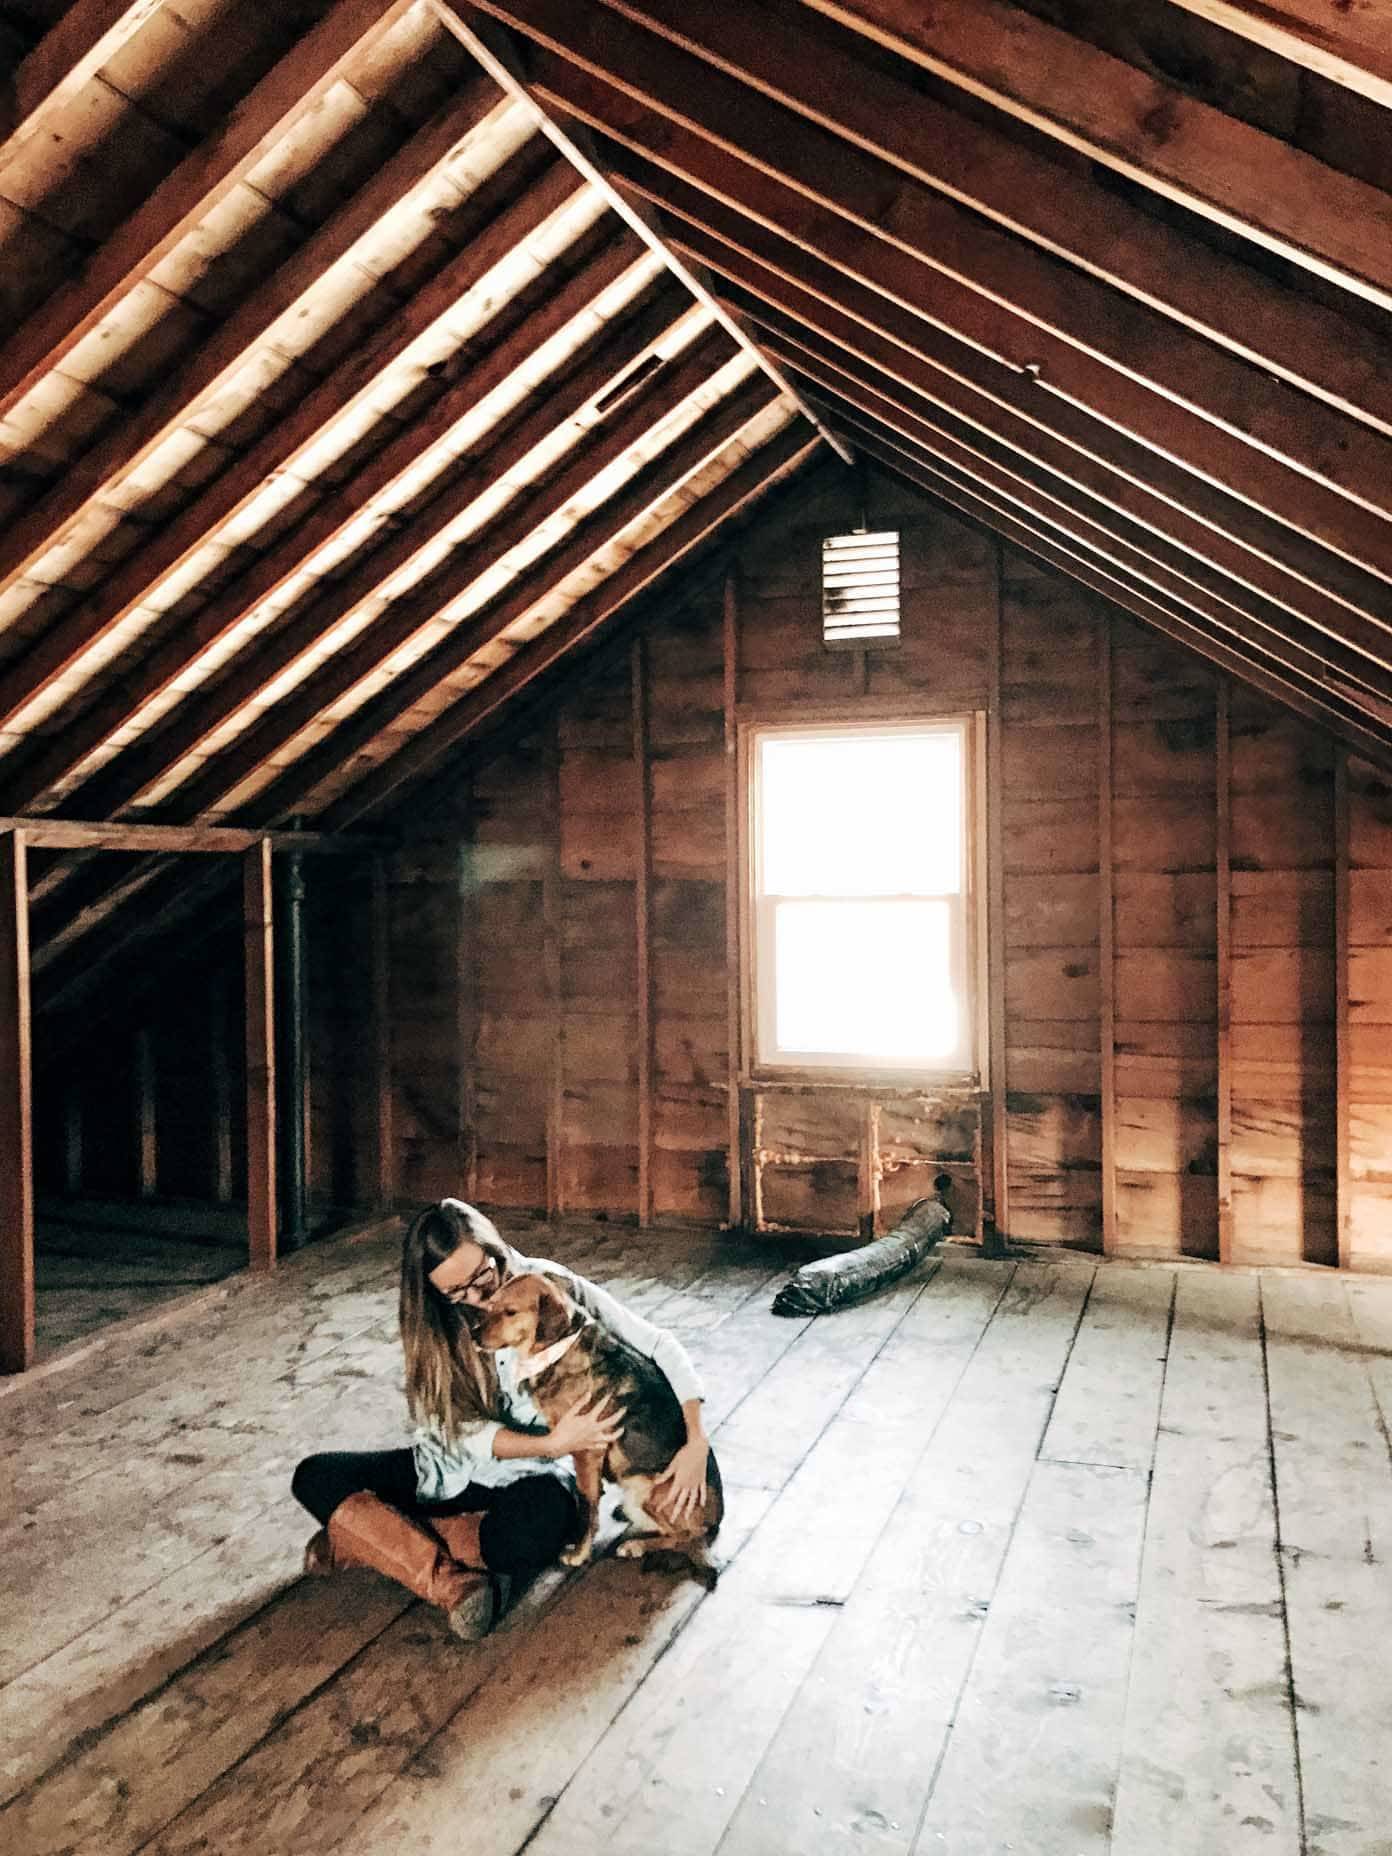 A girl sitting on the wooden floor with her dog in an empty wooden attic.